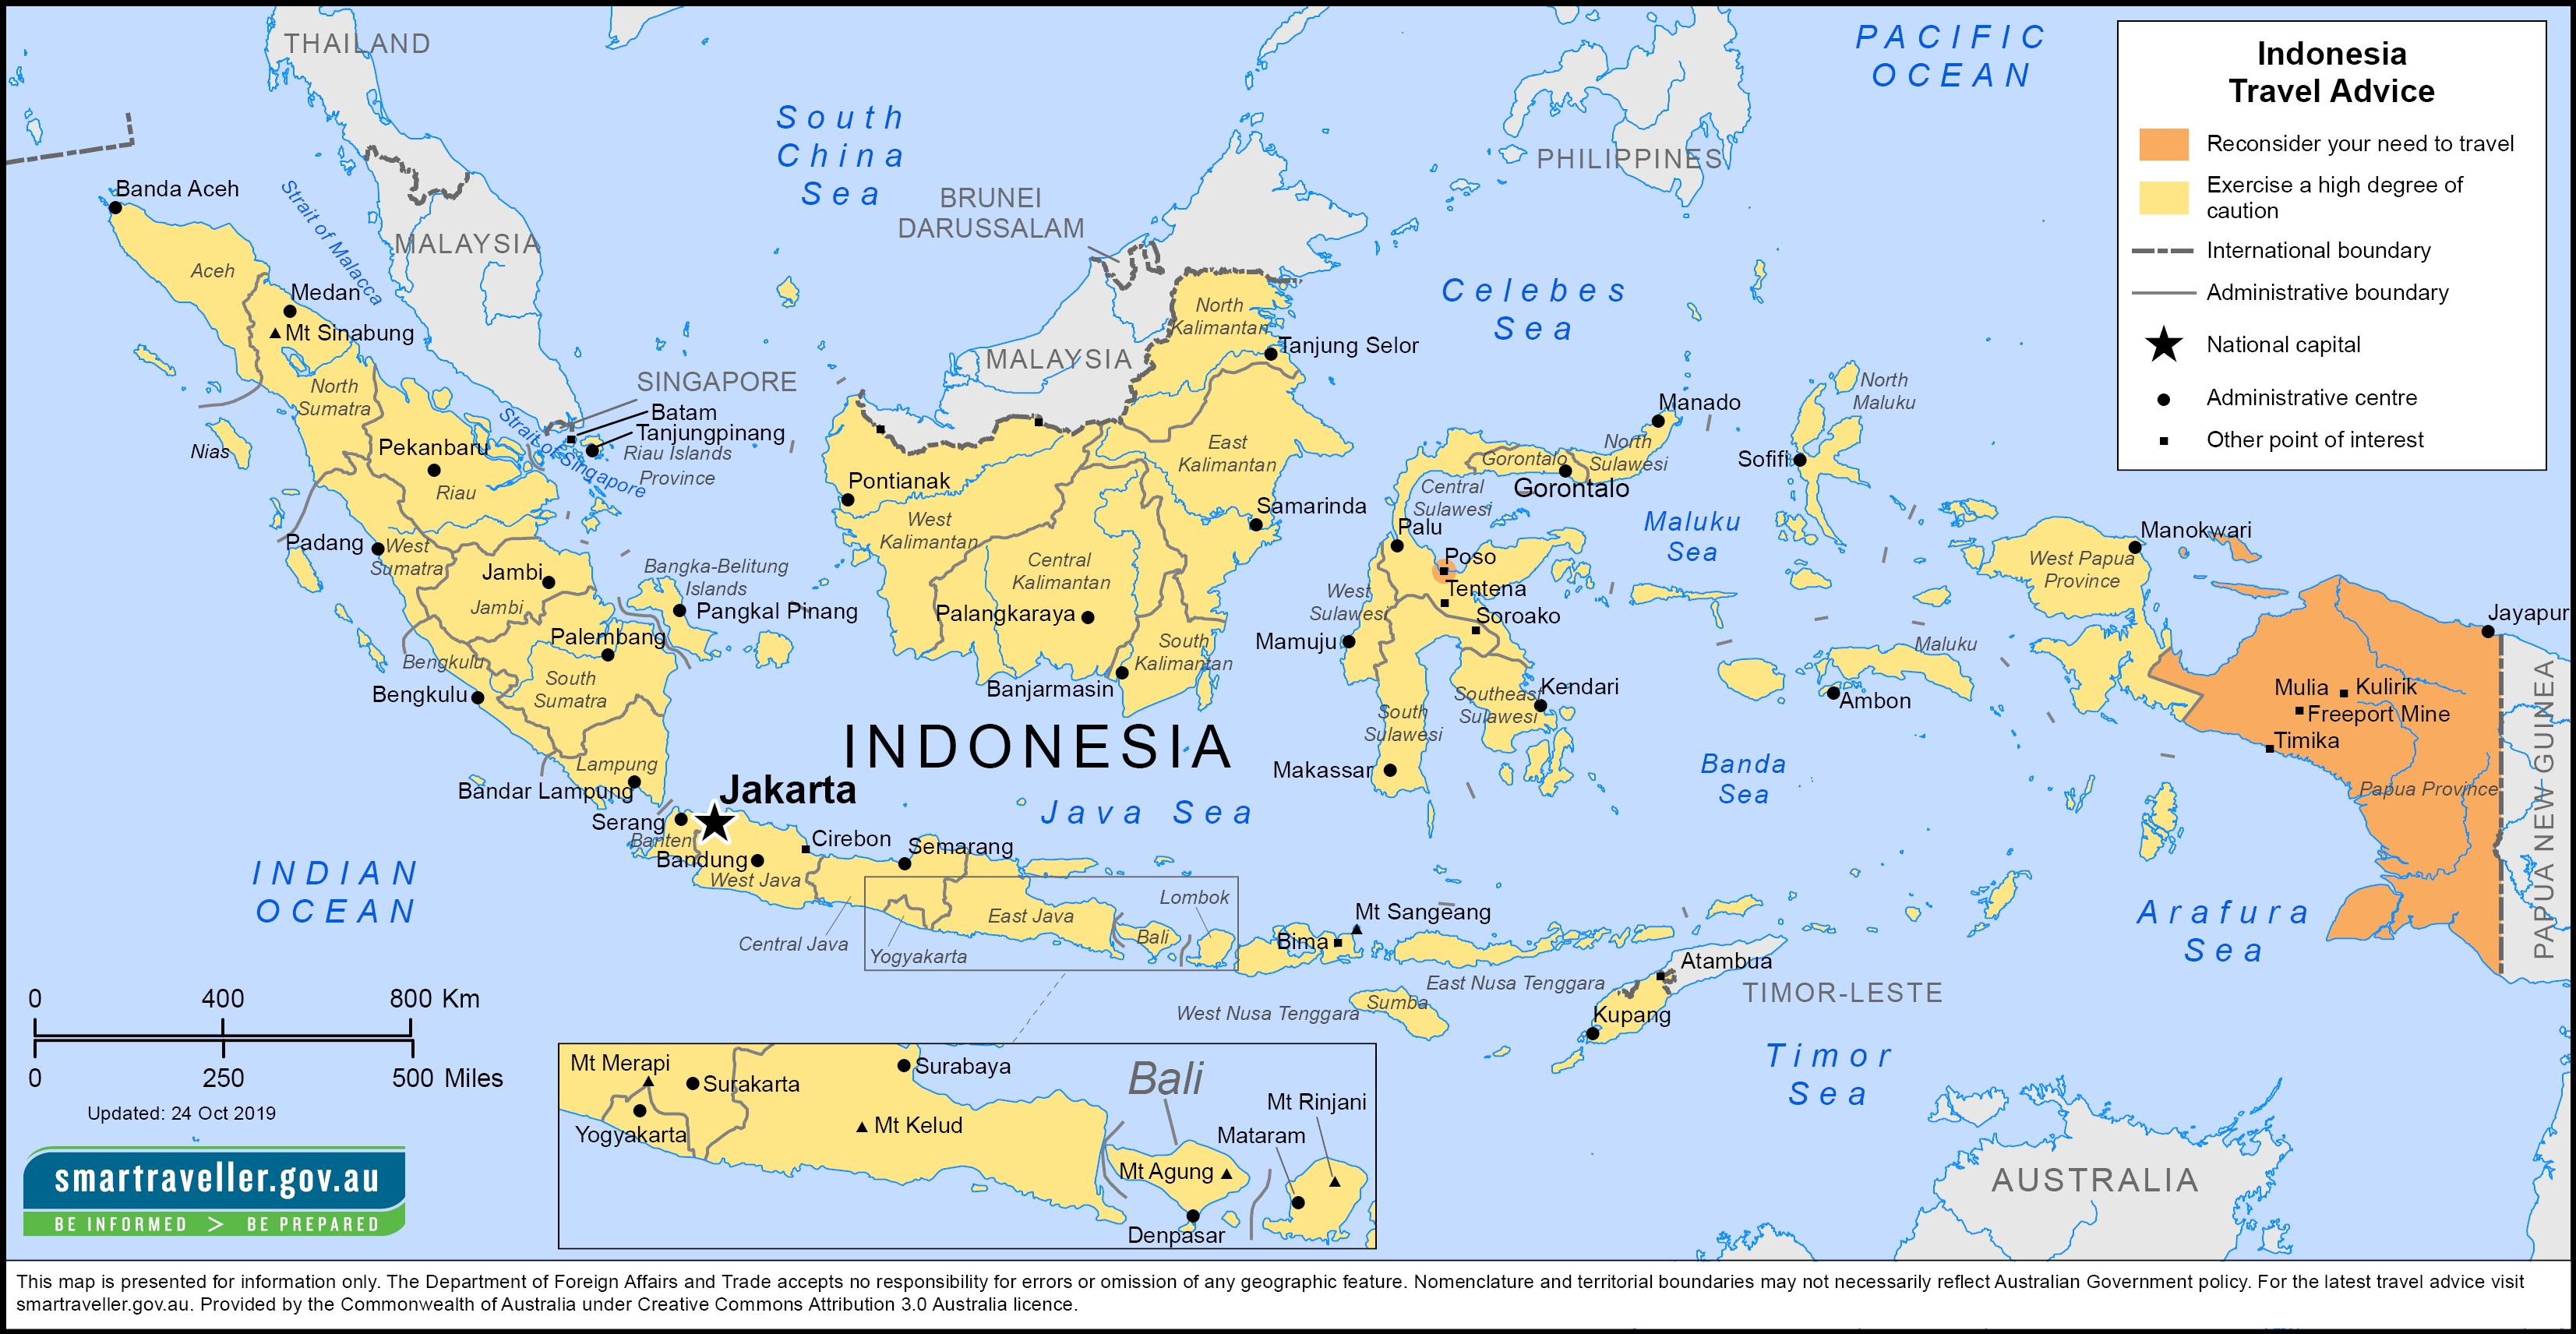 Indonesia under international scrutiny over minerals export ban. (Photo Internet reproduction)